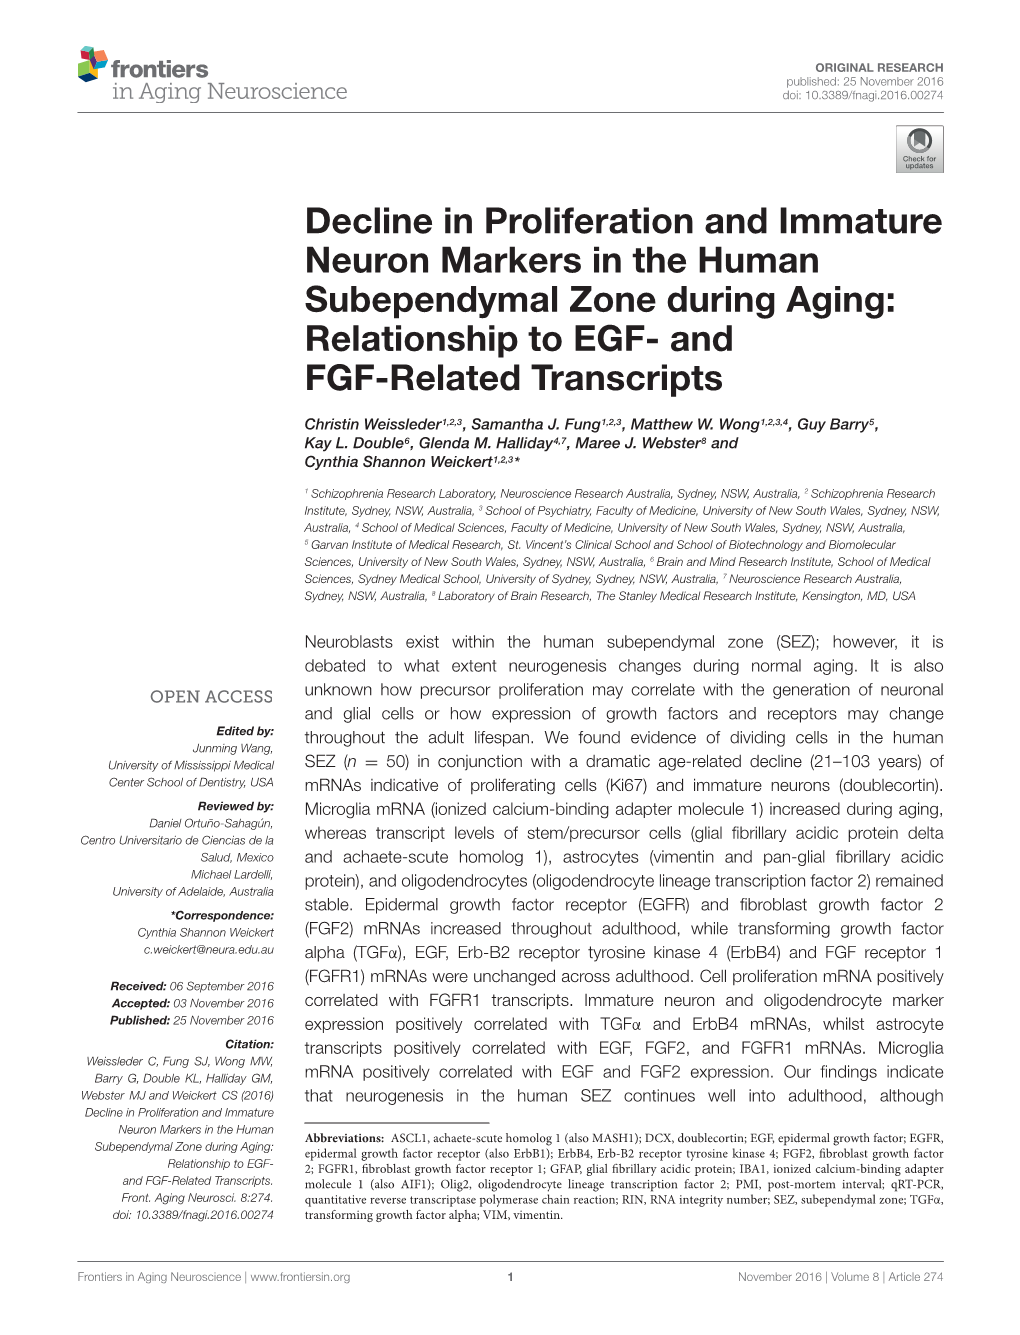 Decline in Proliferation and Immature Neuron Markers in the Human Subependymal Zone During Aging: Relationship to EGF- and FGF-Related Transcripts